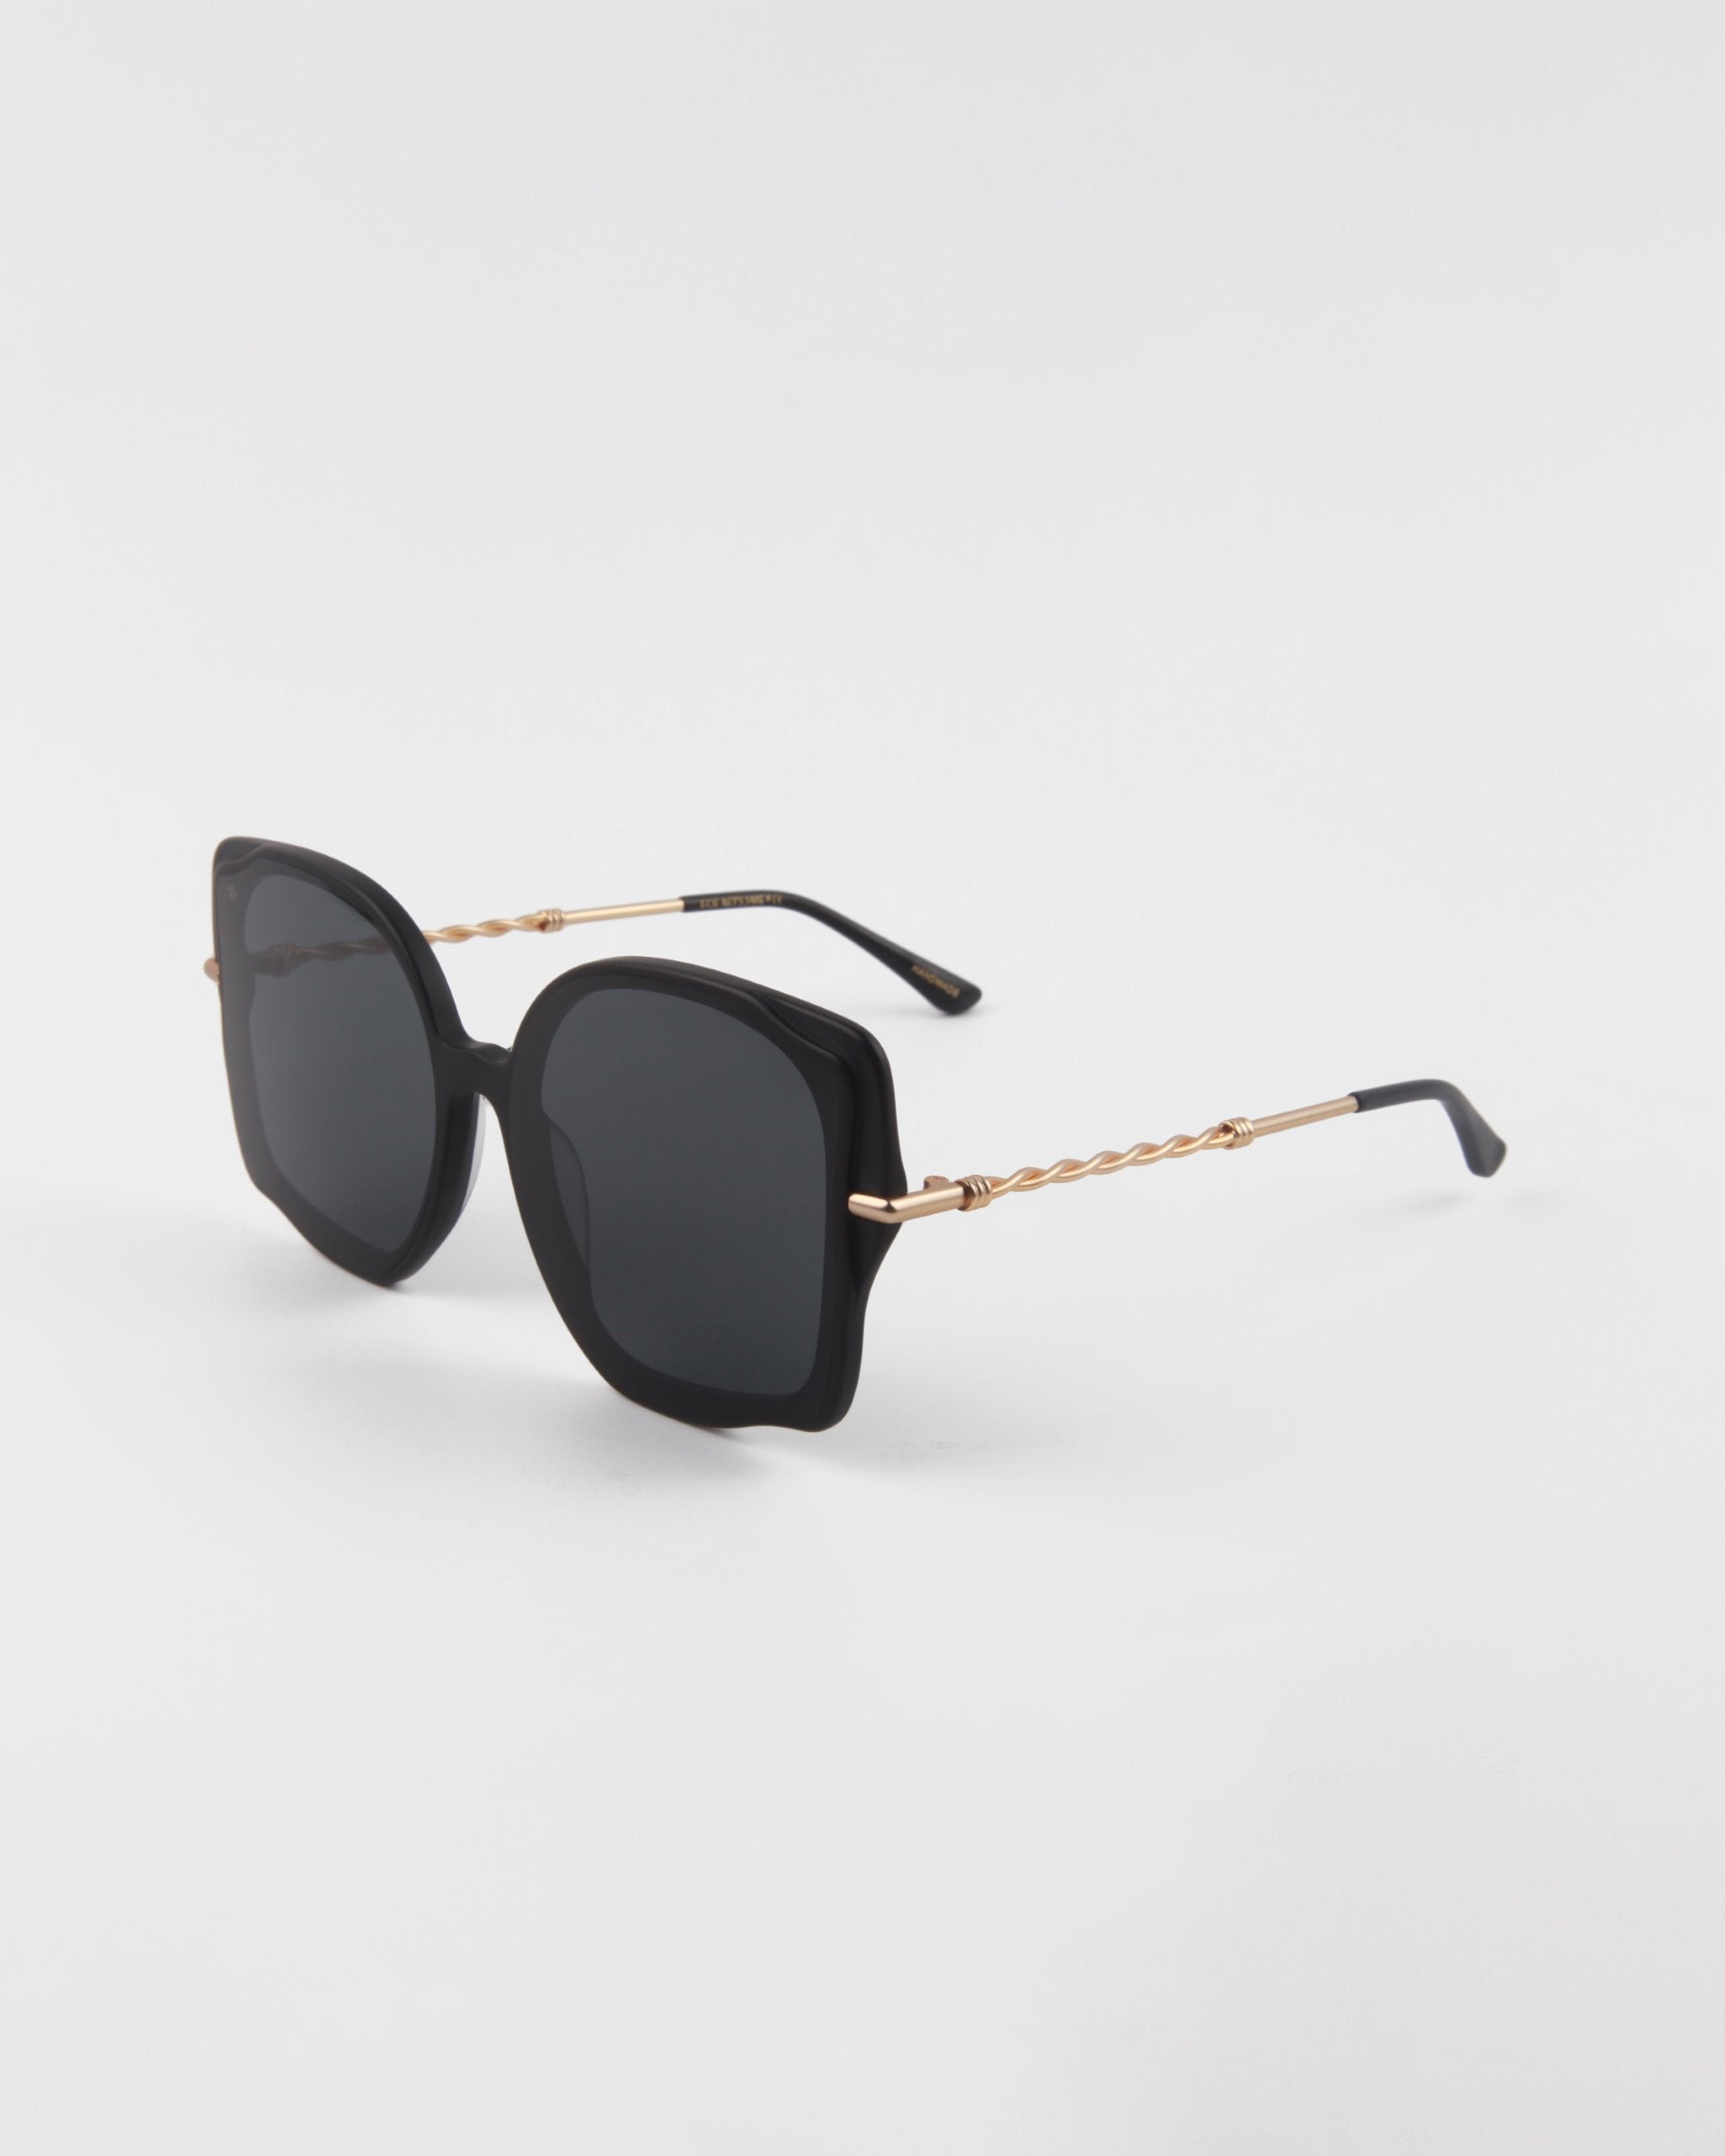 A pair of chic, black square-shaped Fahrenheit handmade acetate sunglasses by For Art&#39;s Sake® with dark lenses. The oversized frames have 18-karat gold-plated arms featuring a twisted design near the hinges. The sunglasses rest on a white surface with a gentle shadow.